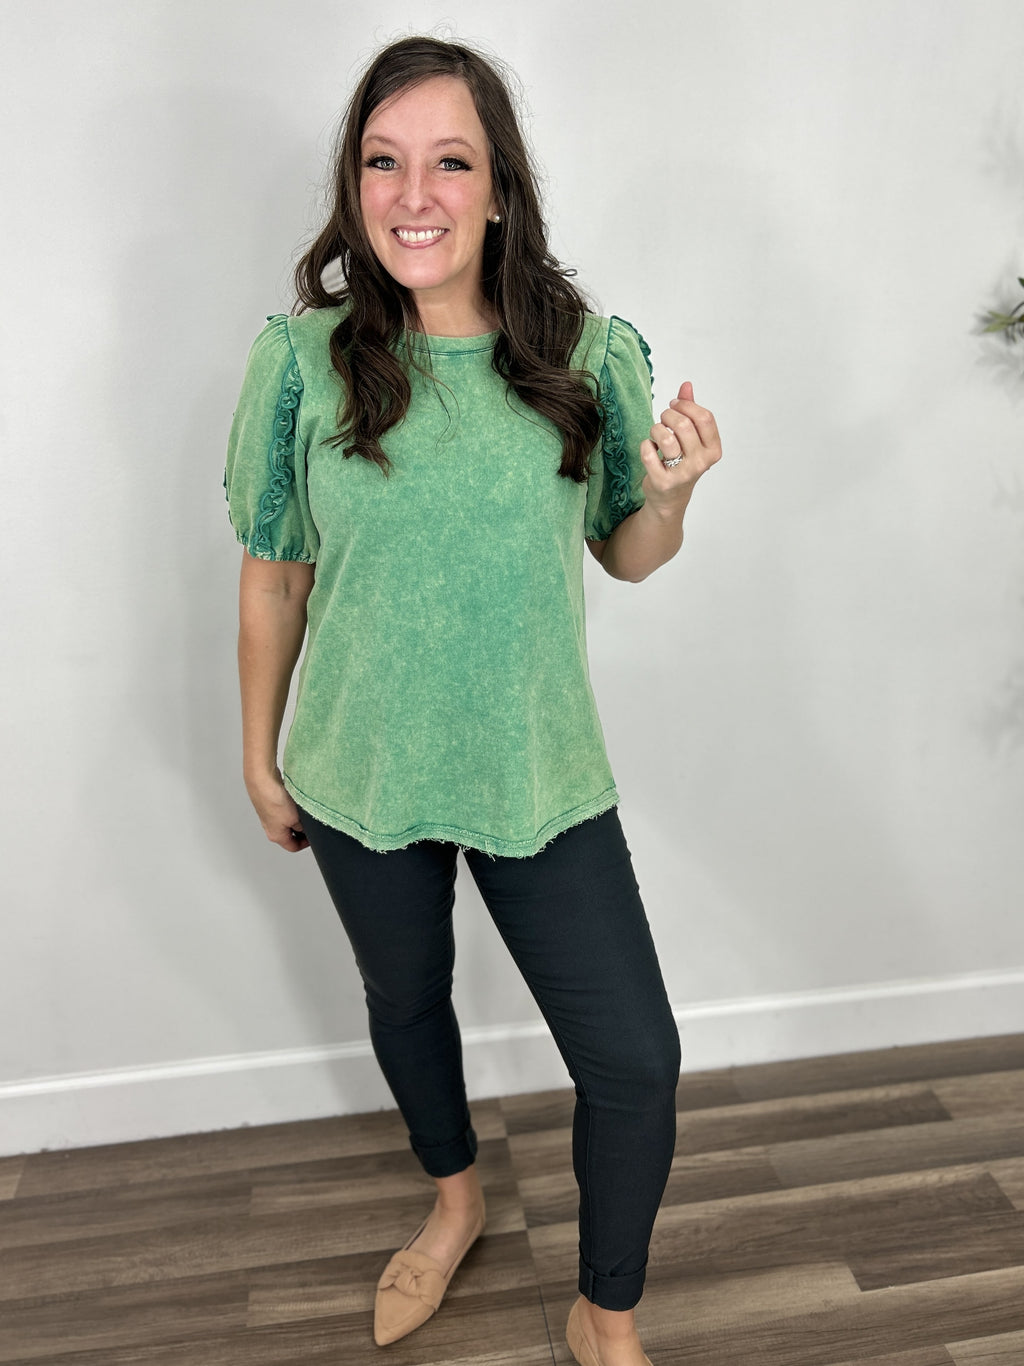 Women's Adaline mineral washed puff sleeve top in green paired with charcoal skinny jeans.